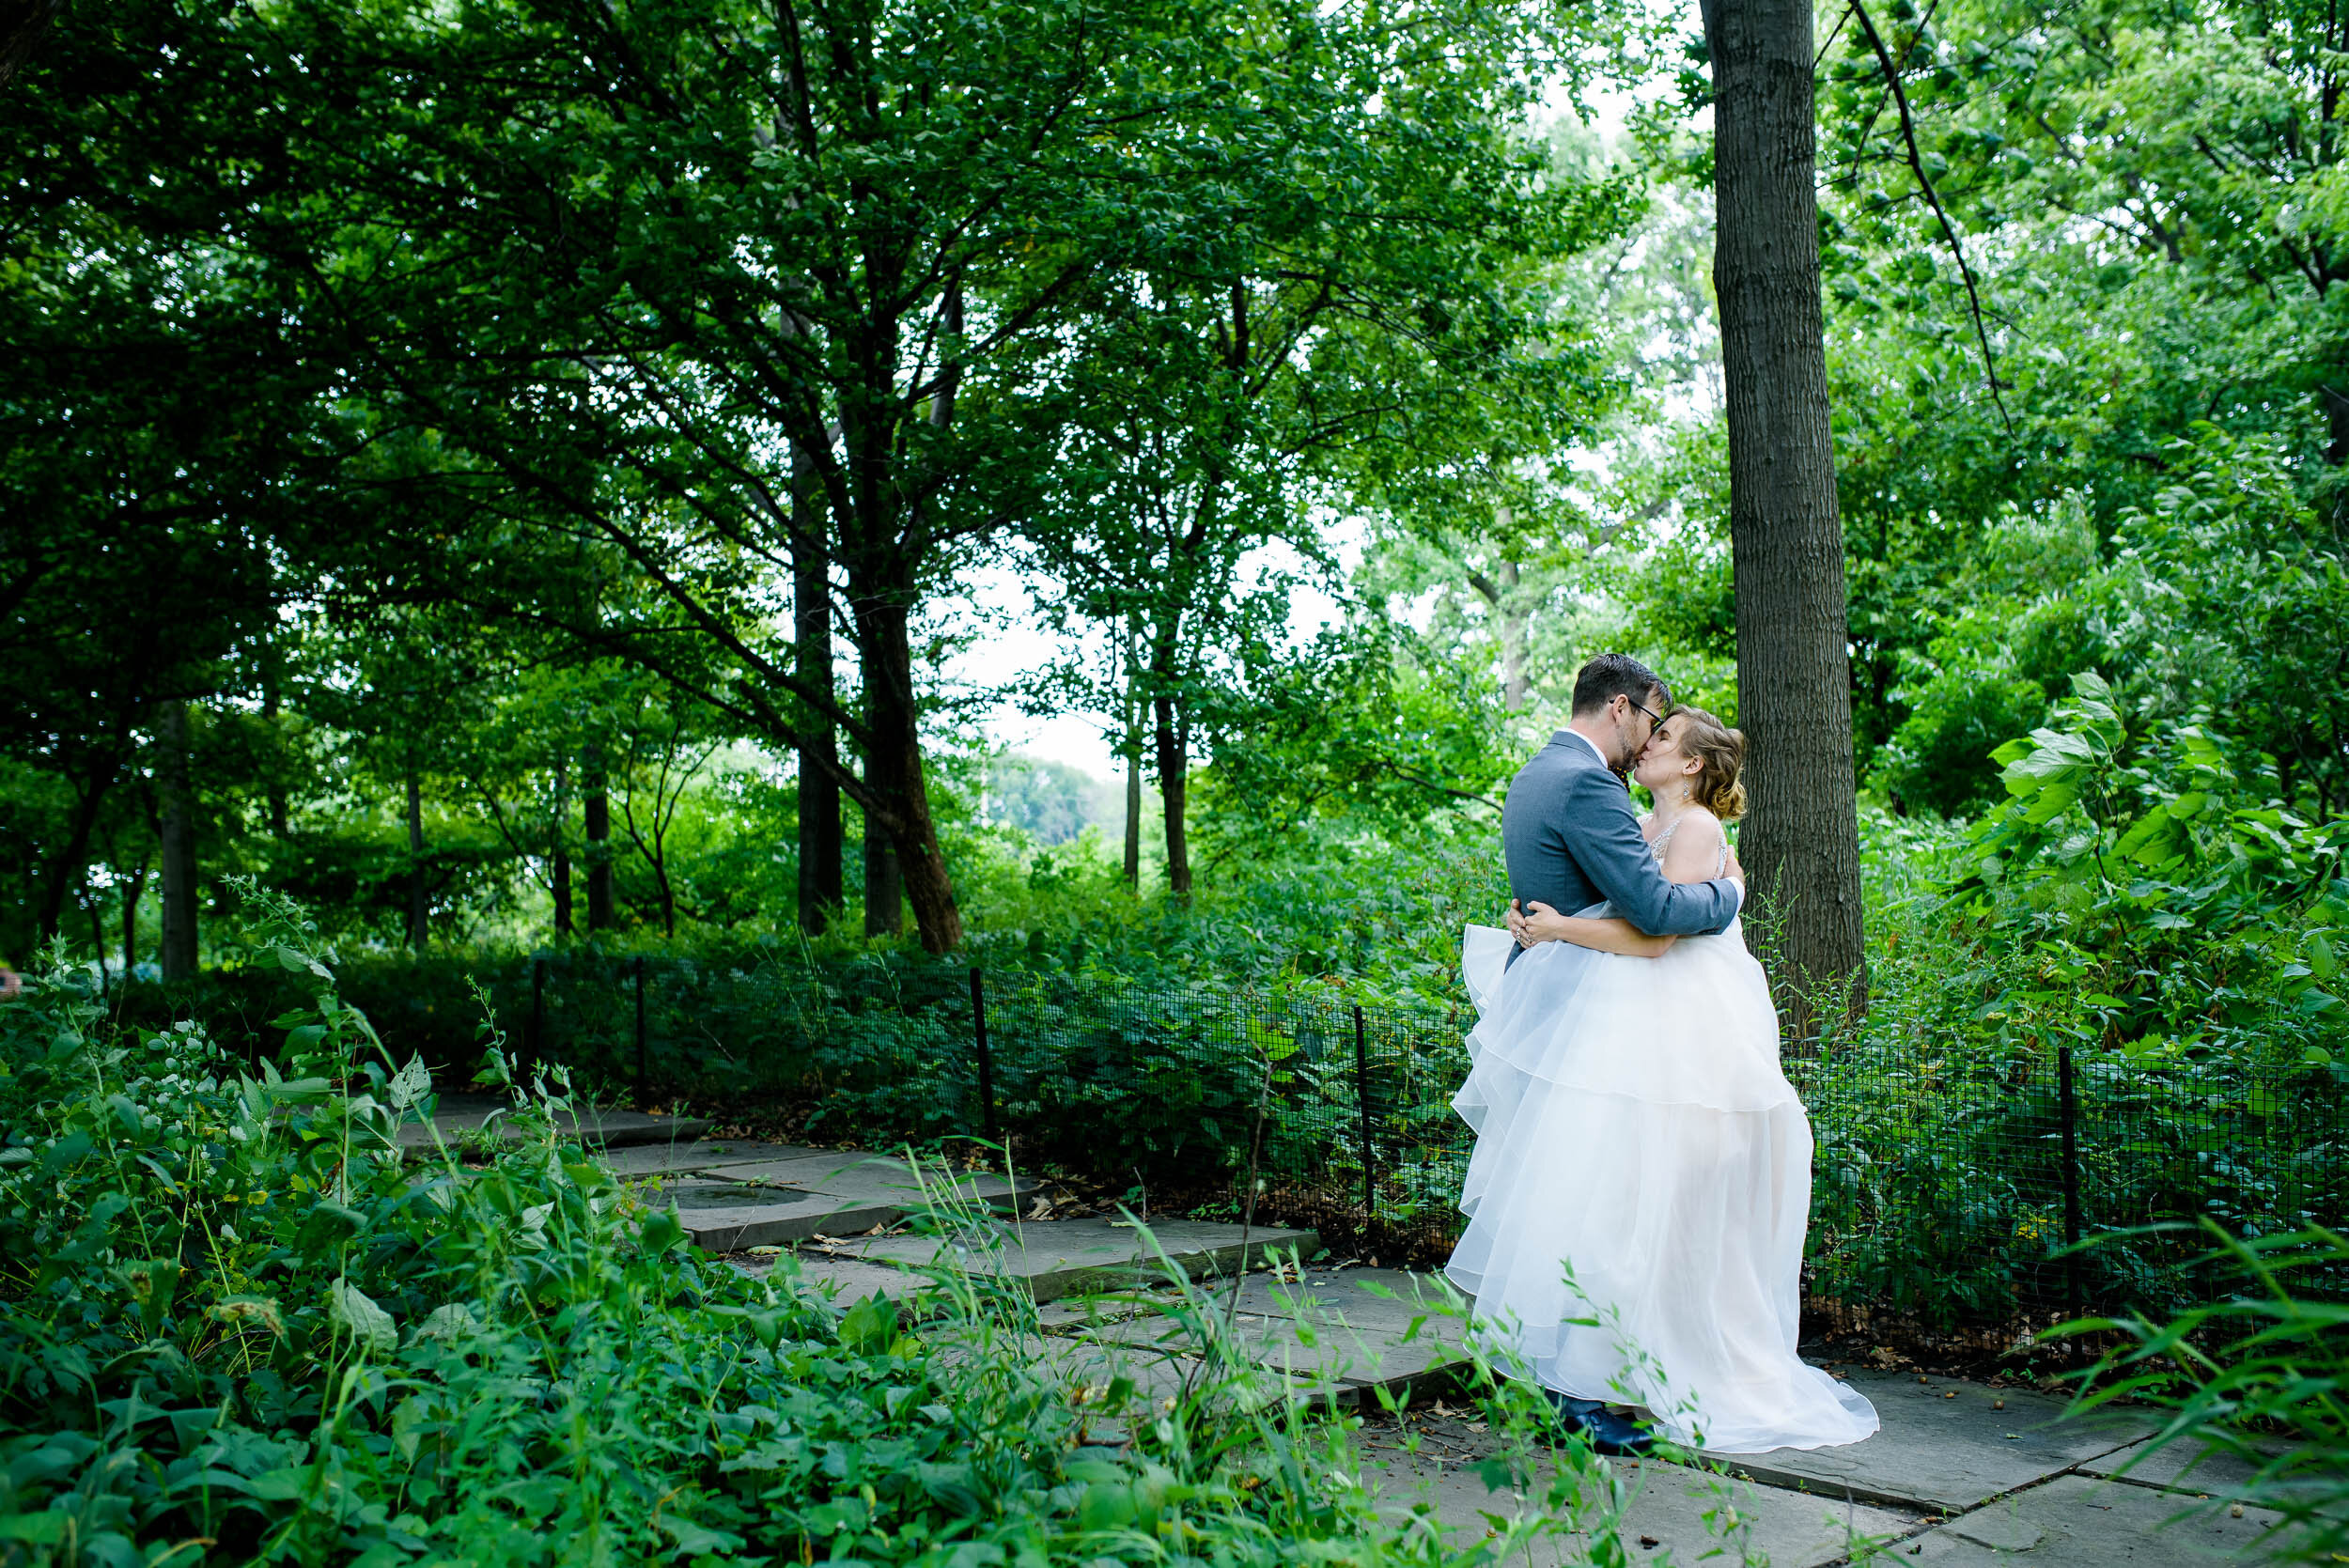 Bride and groom first look: Columbus Park Refectory Chicago wedding captured by J. Brown Photography.